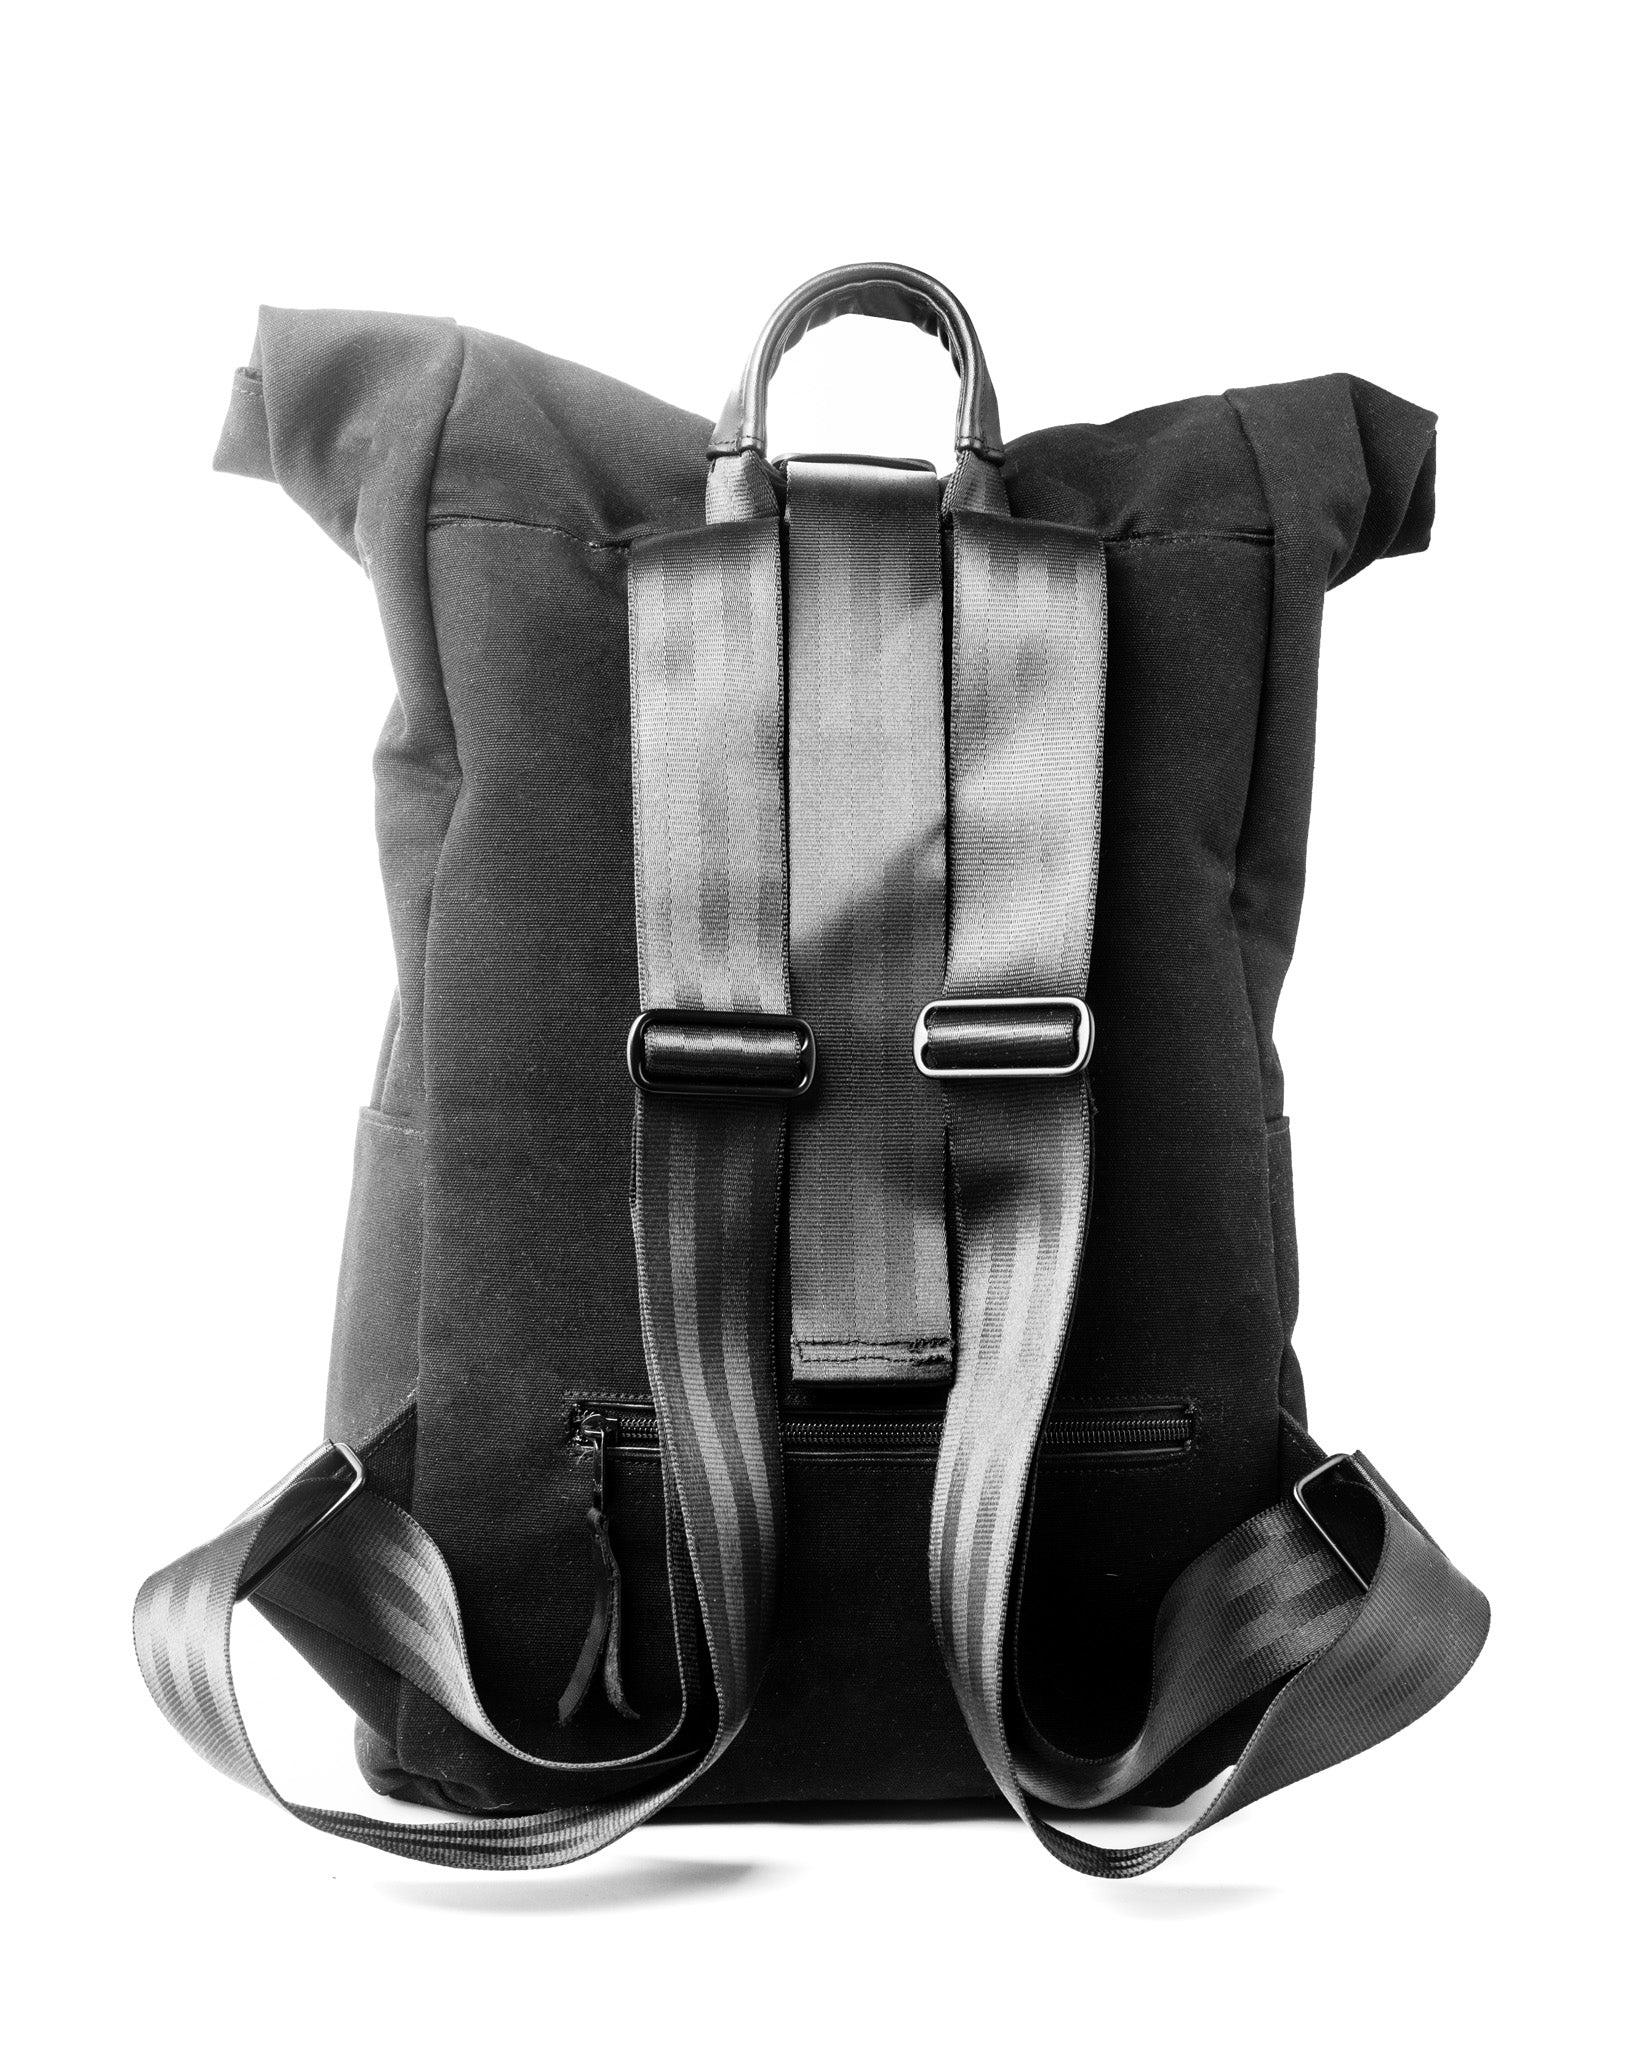 SUMMIT Roll Top Backpack-Black - theabags